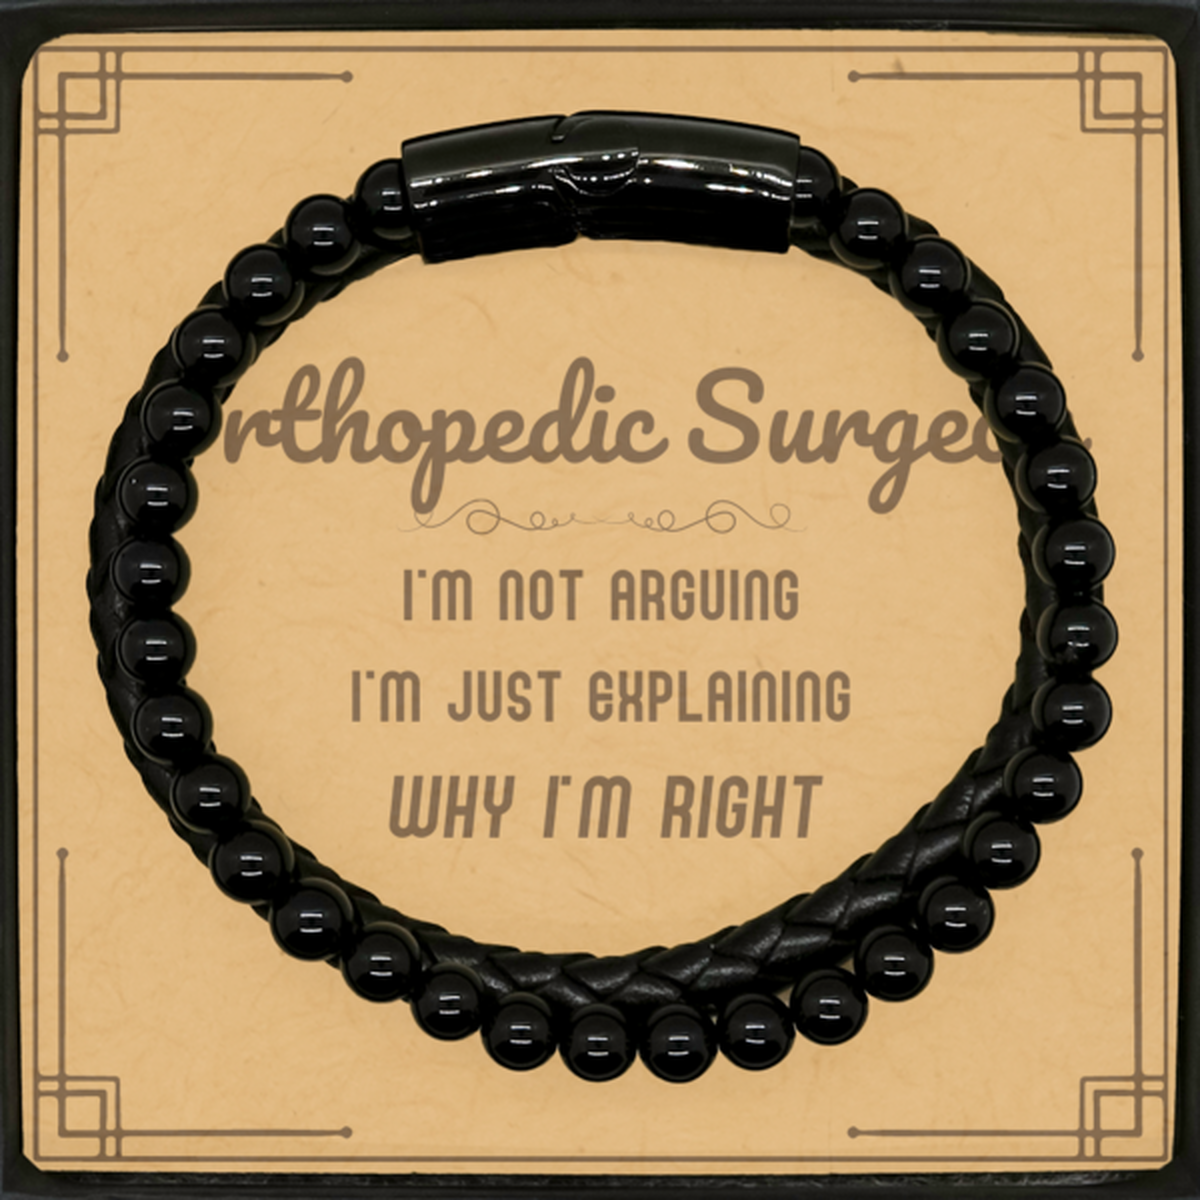 Orthopedic Surgeon I'm not Arguing. I'm Just Explaining Why I'm RIGHT Stone Leather Bracelets, Funny Saying Quote Orthopedic Surgeon Gifts For Orthopedic Surgeon Message Card Graduation Birthday Christmas Gifts for Men Women Coworker